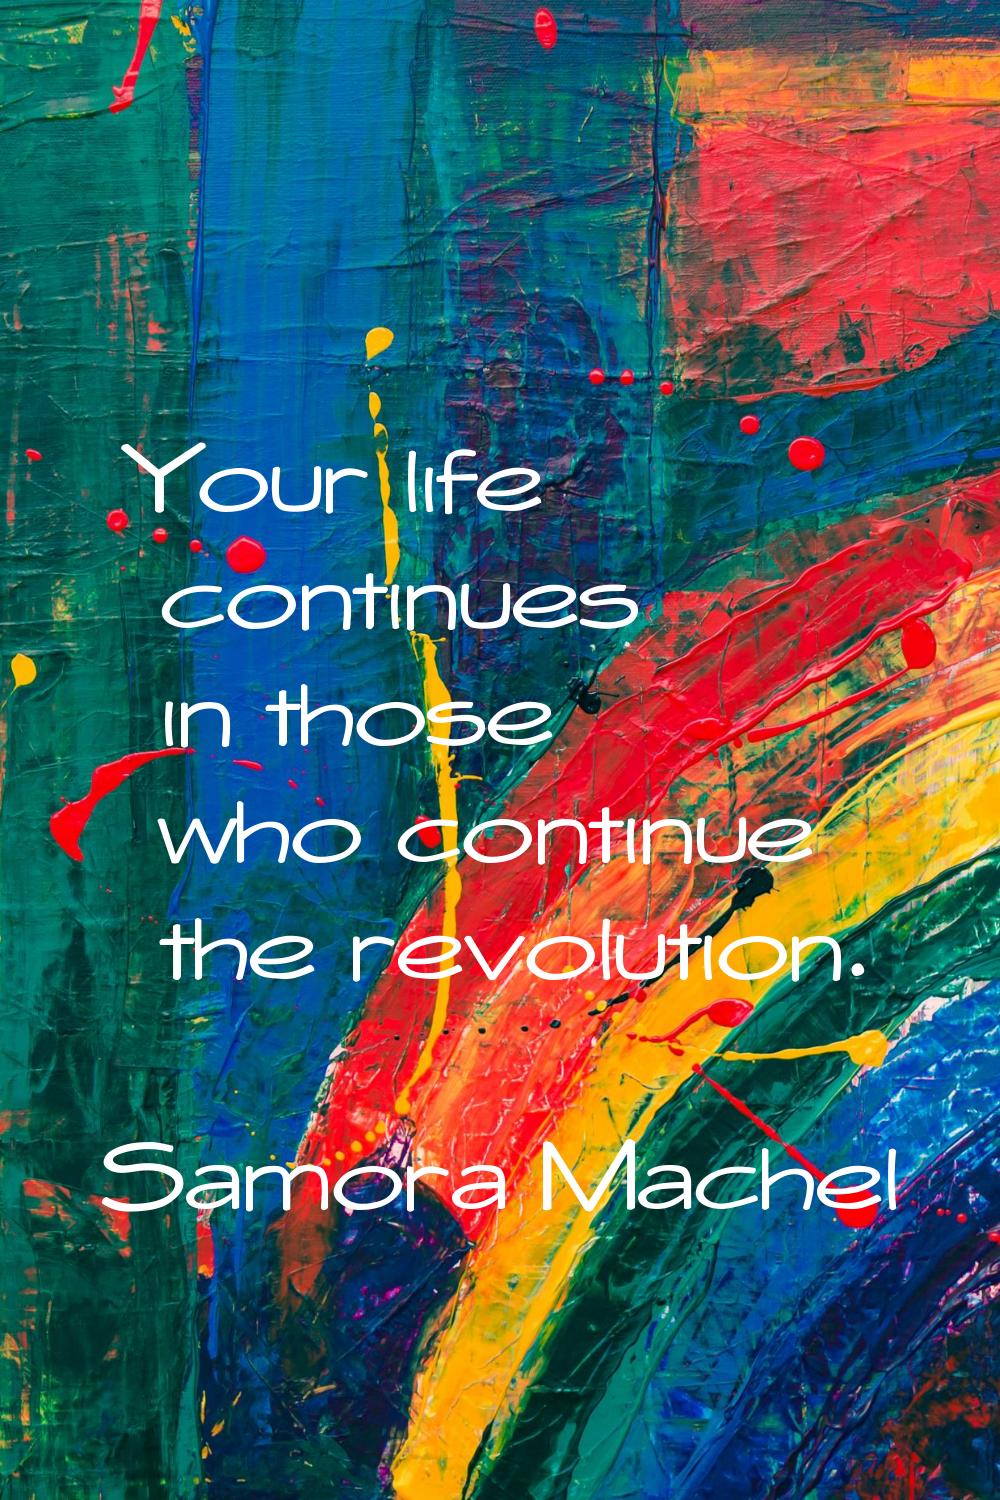 Your life continues in those who continue the revolution.